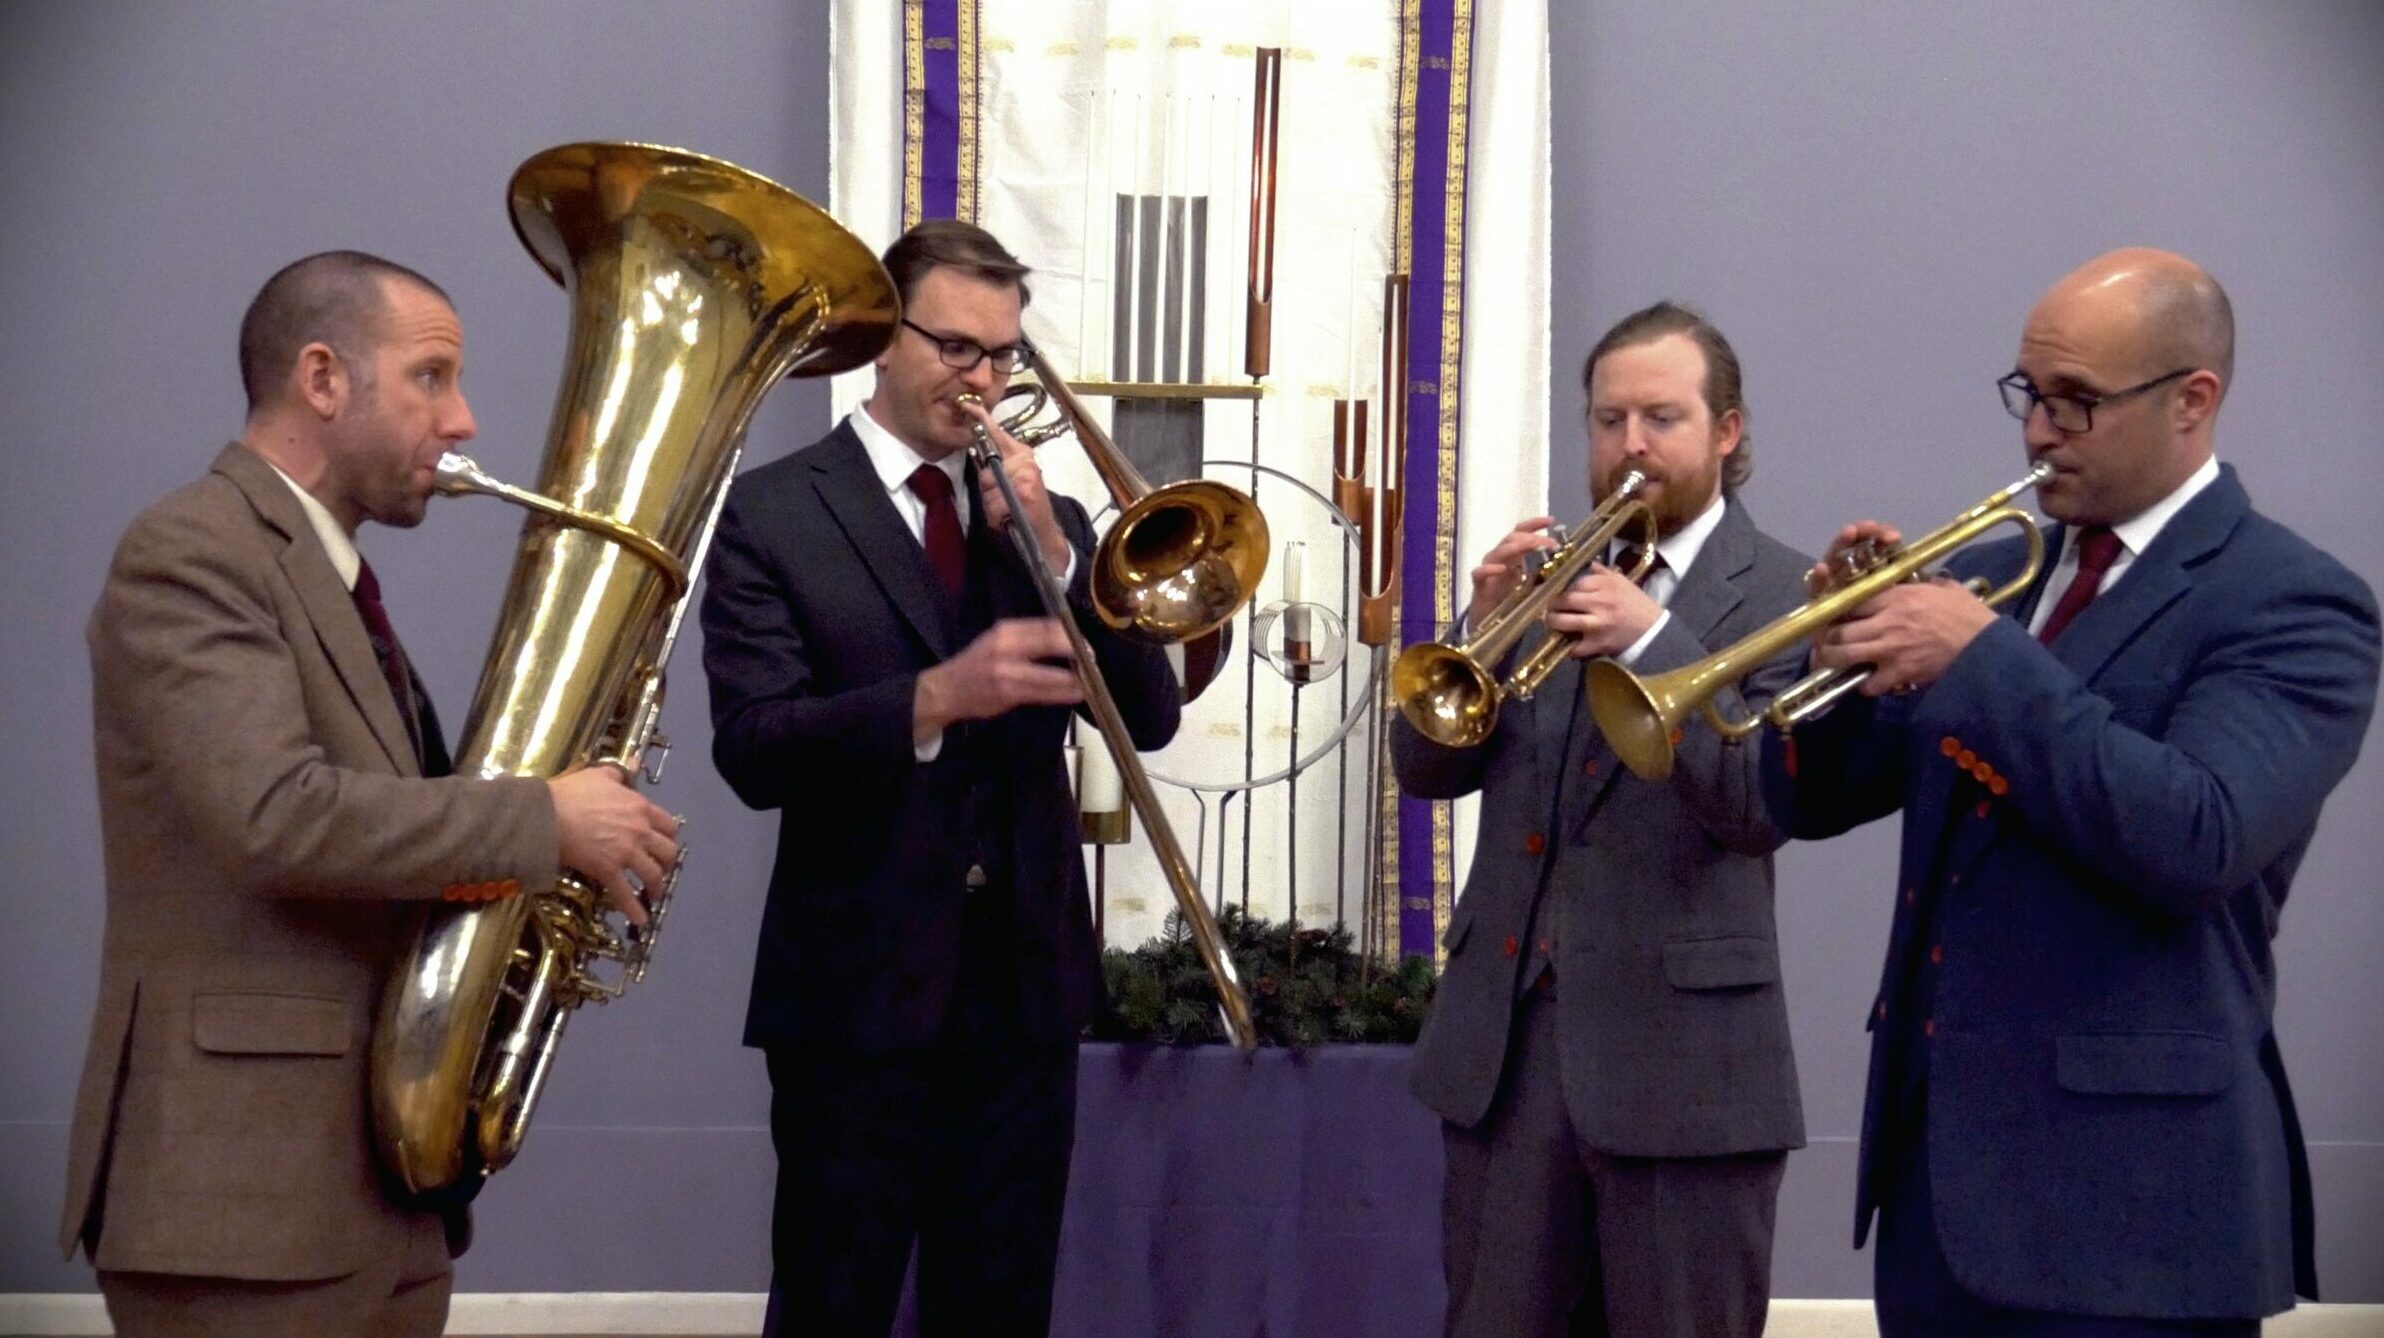 Immaculate army musical brass instruments For Fascinating Sound